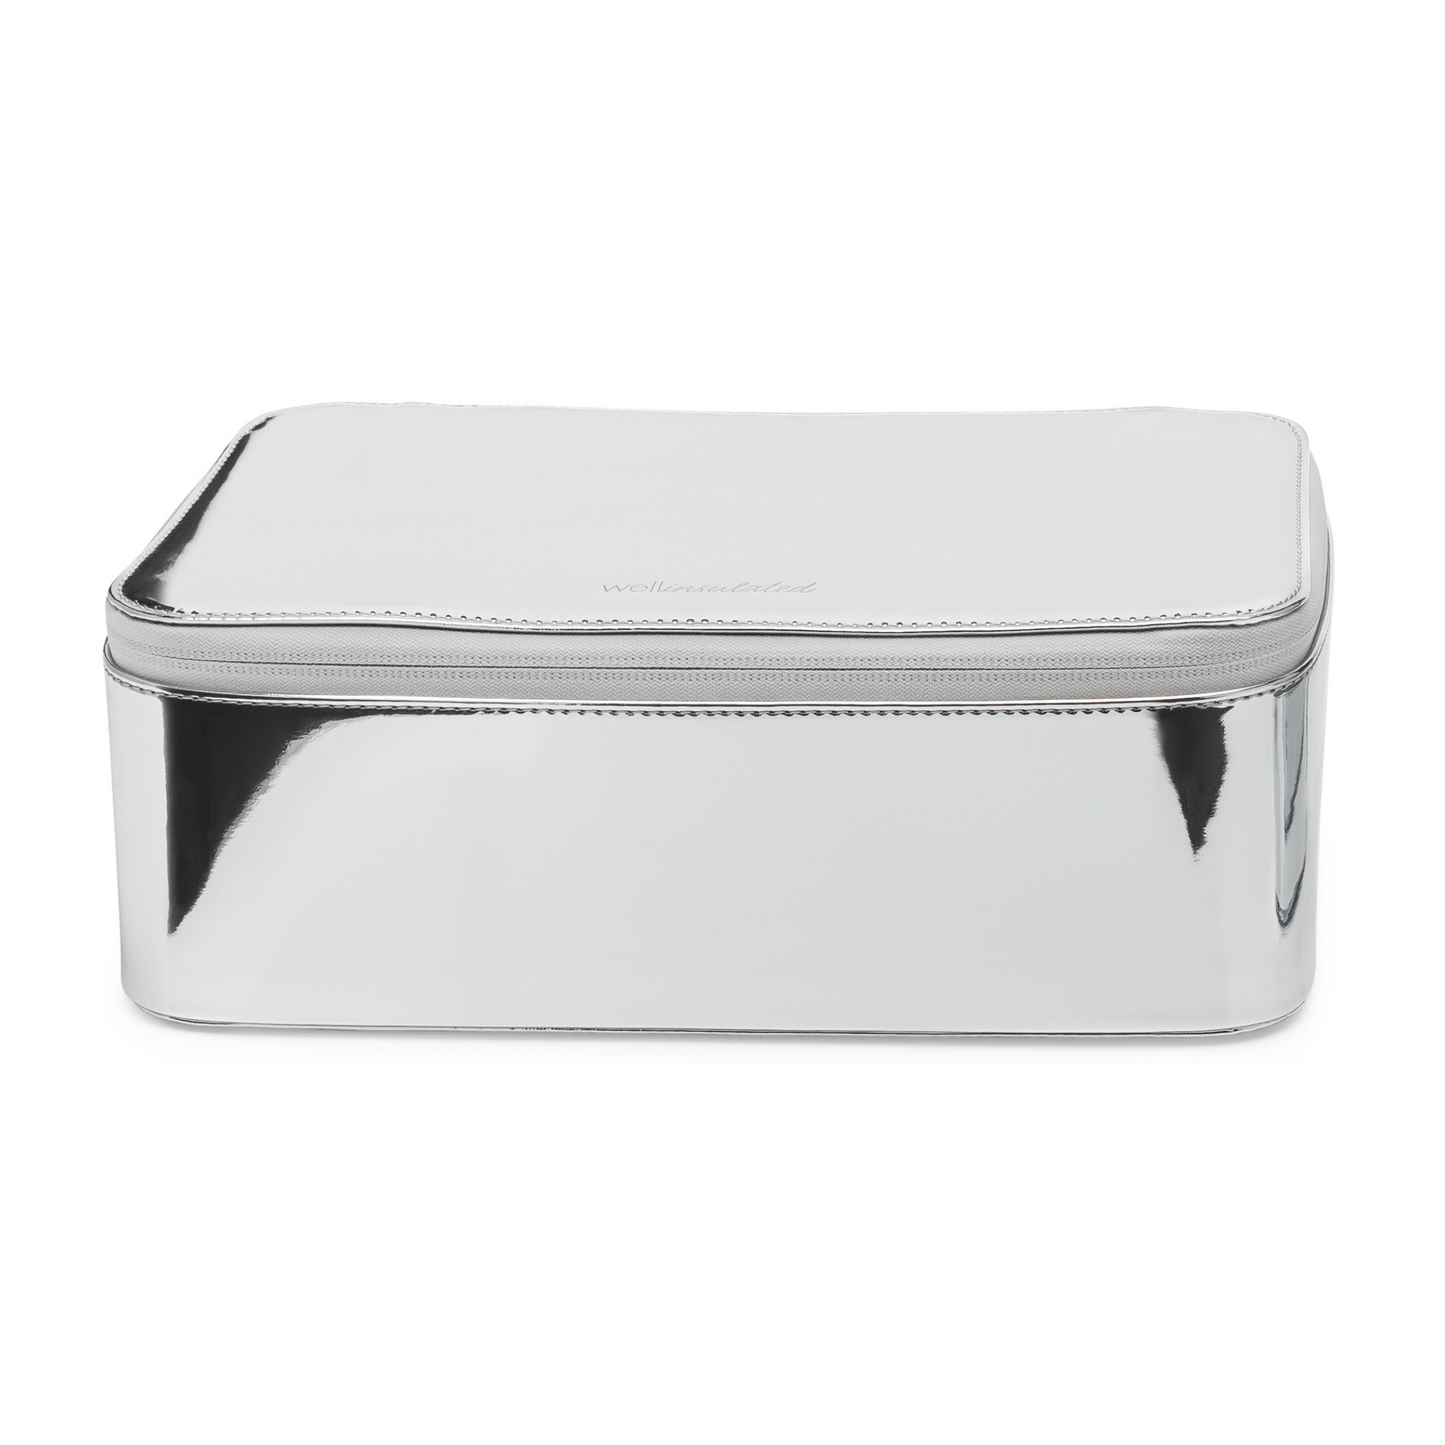 Front view of the Well Insulated Performance Travel Case. The case is metallic silver. 